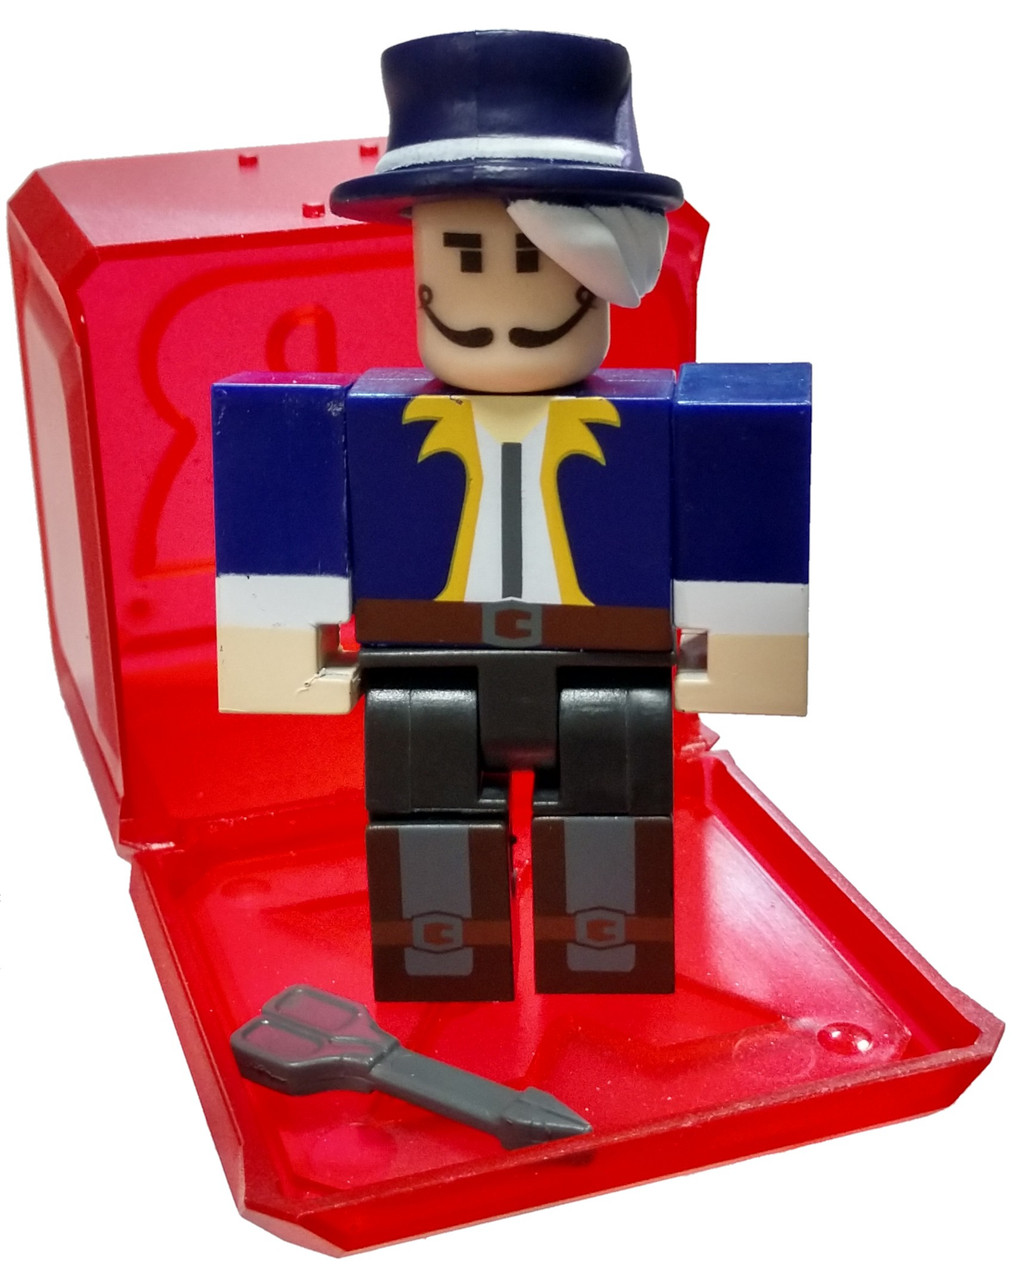 Roblox Celebrity Collection Series 5 Vesteria Barber S 3 Mini Figure With Red Cube And Online Code Loose Jazwares Toywiz - roblox the legends w litozinnamon gusmanak merely thegamer101